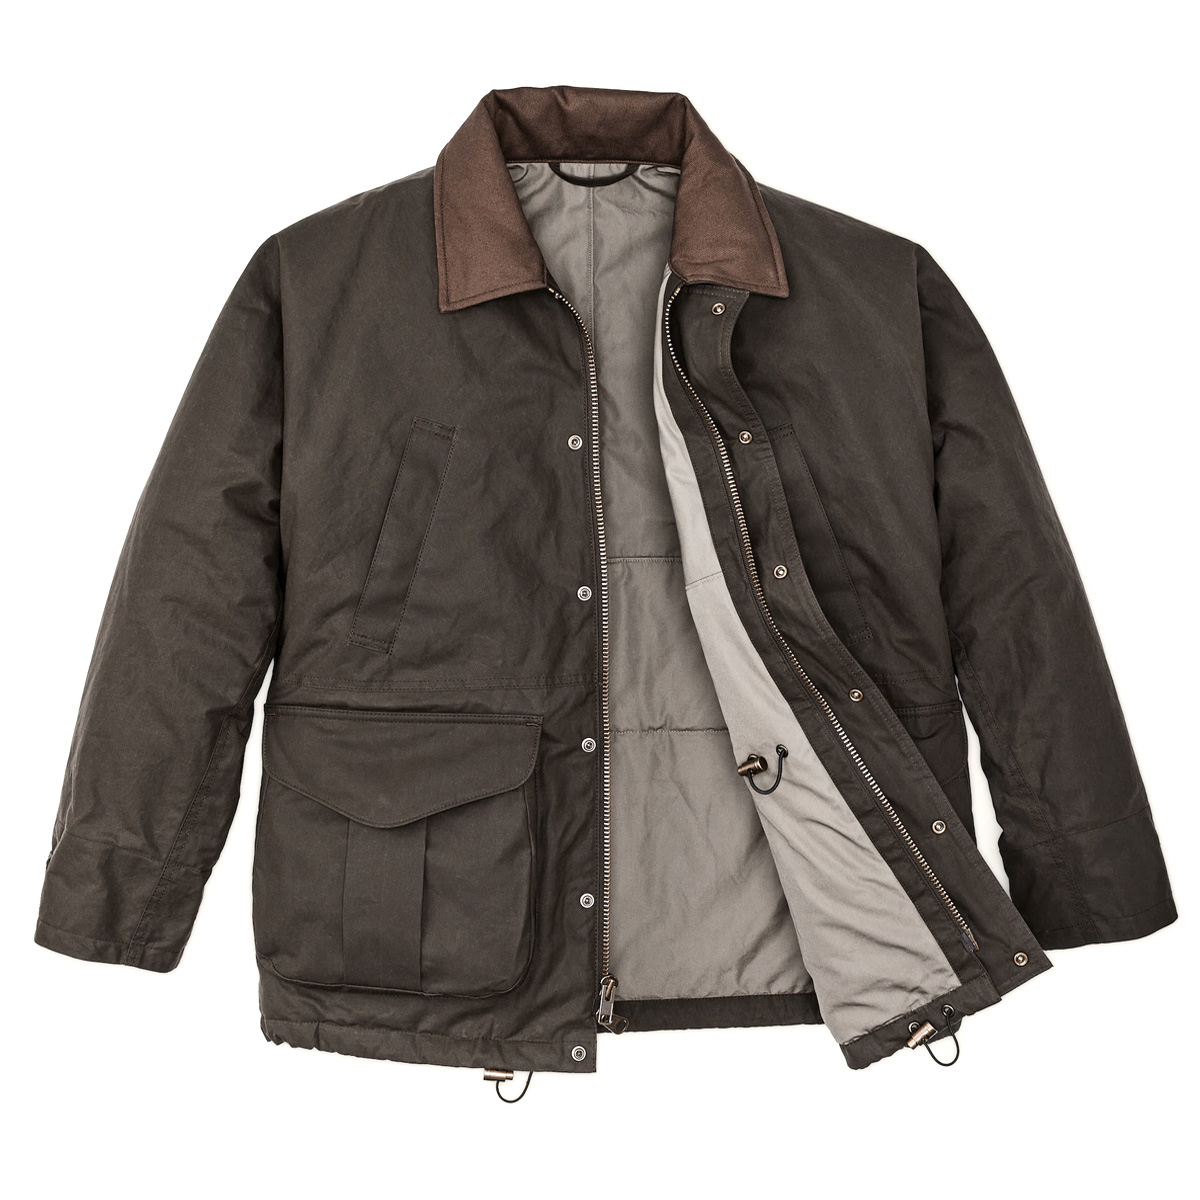 Filson Ranger Insulated Field Jacket Root, an ideal blend of traditional fabric and cutting-edge insulation